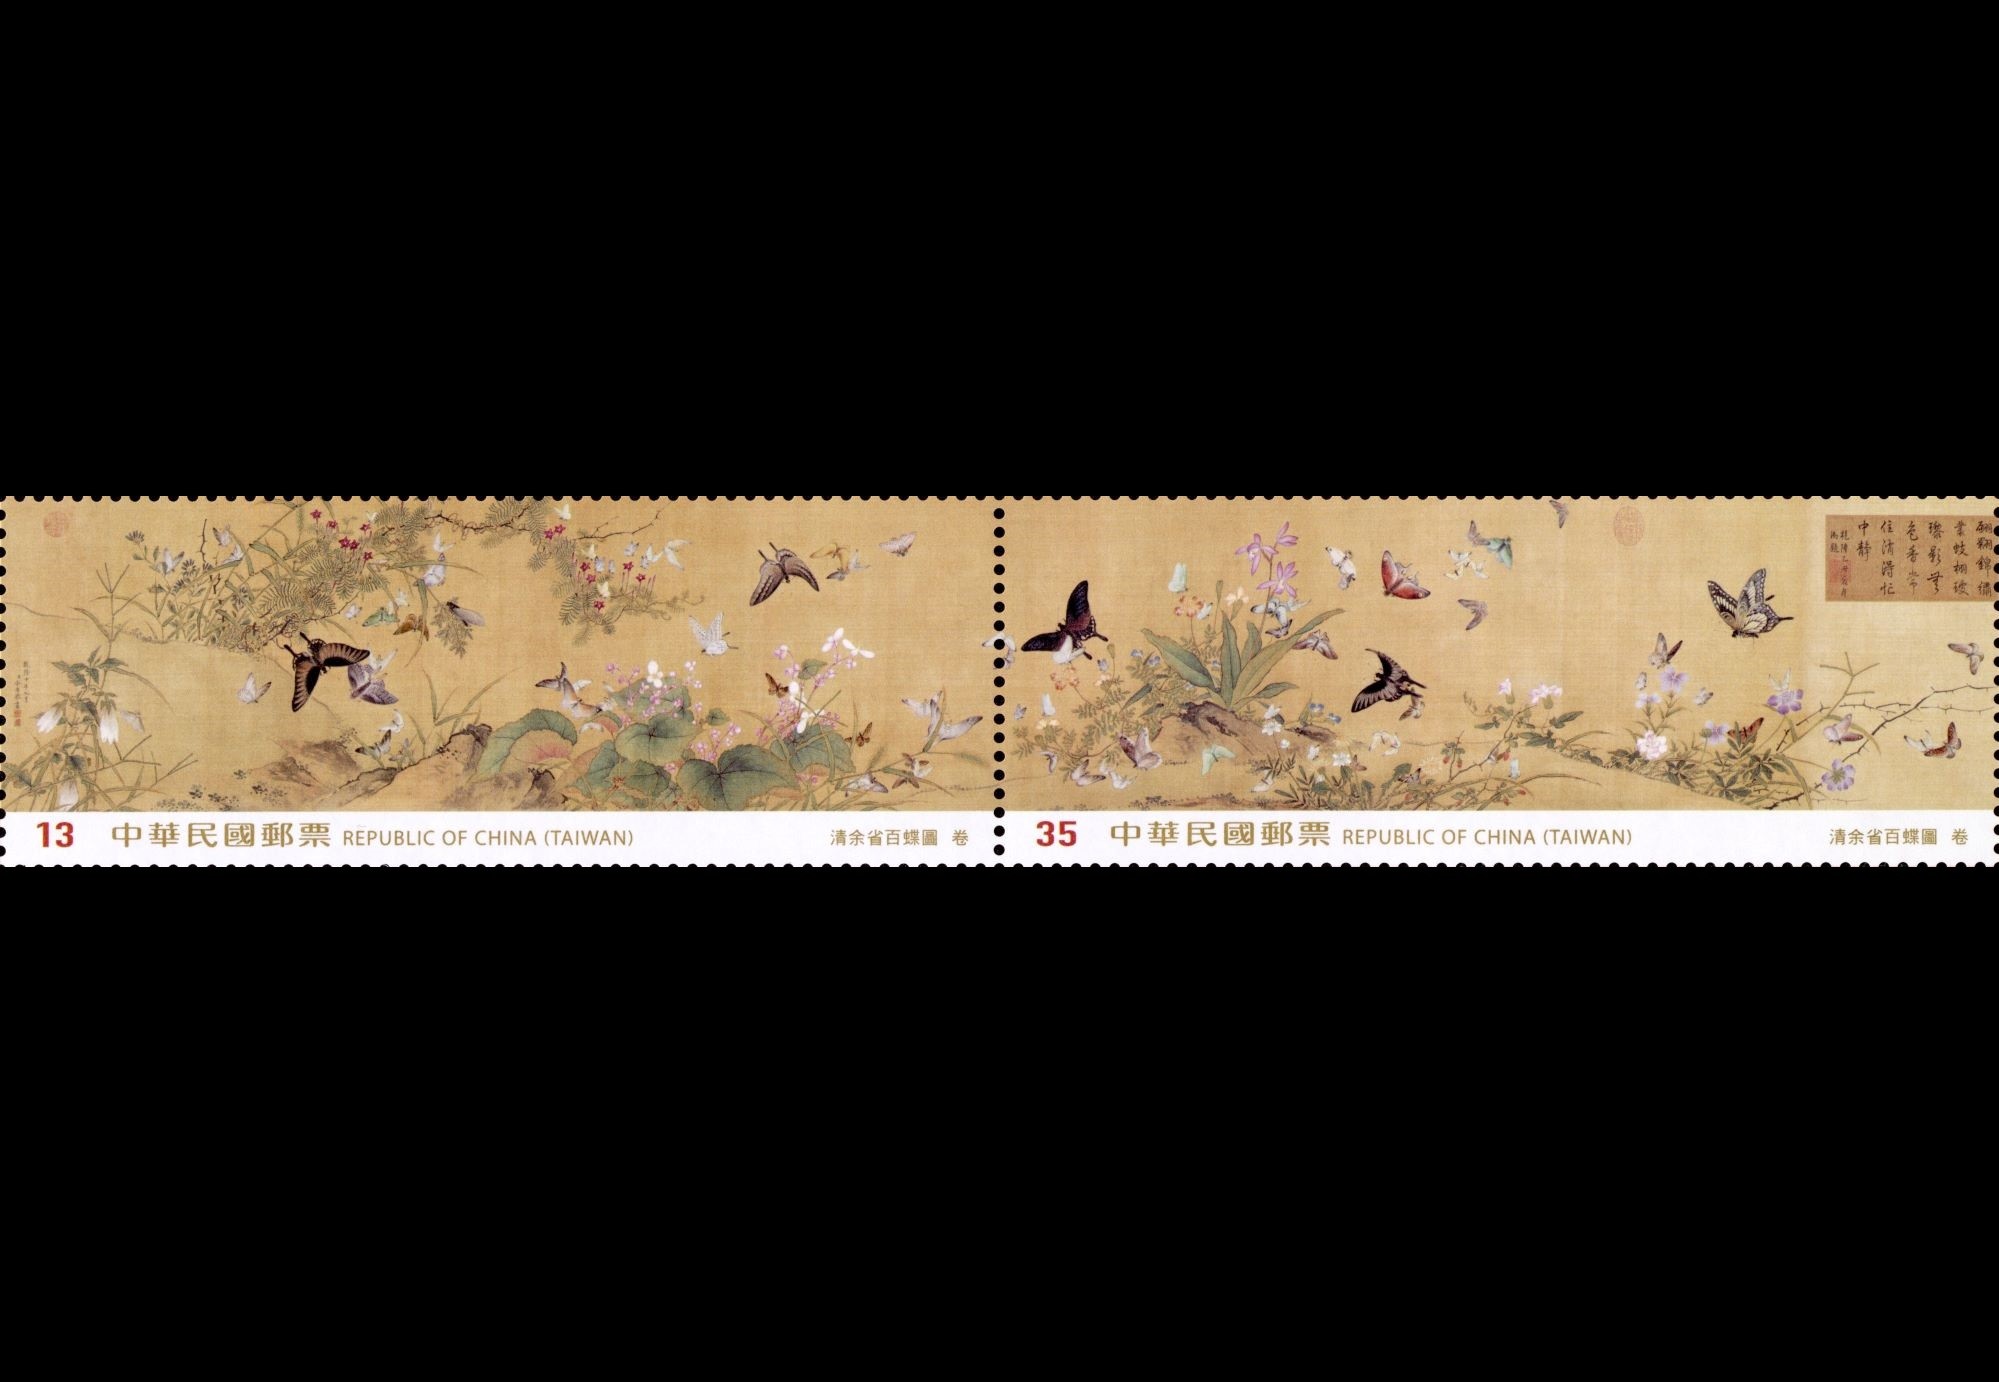 Sp.741 TAIPEI 2023 – 39th Asian International Stamp Exhibition Postage Stamps: Myriad Butterflies